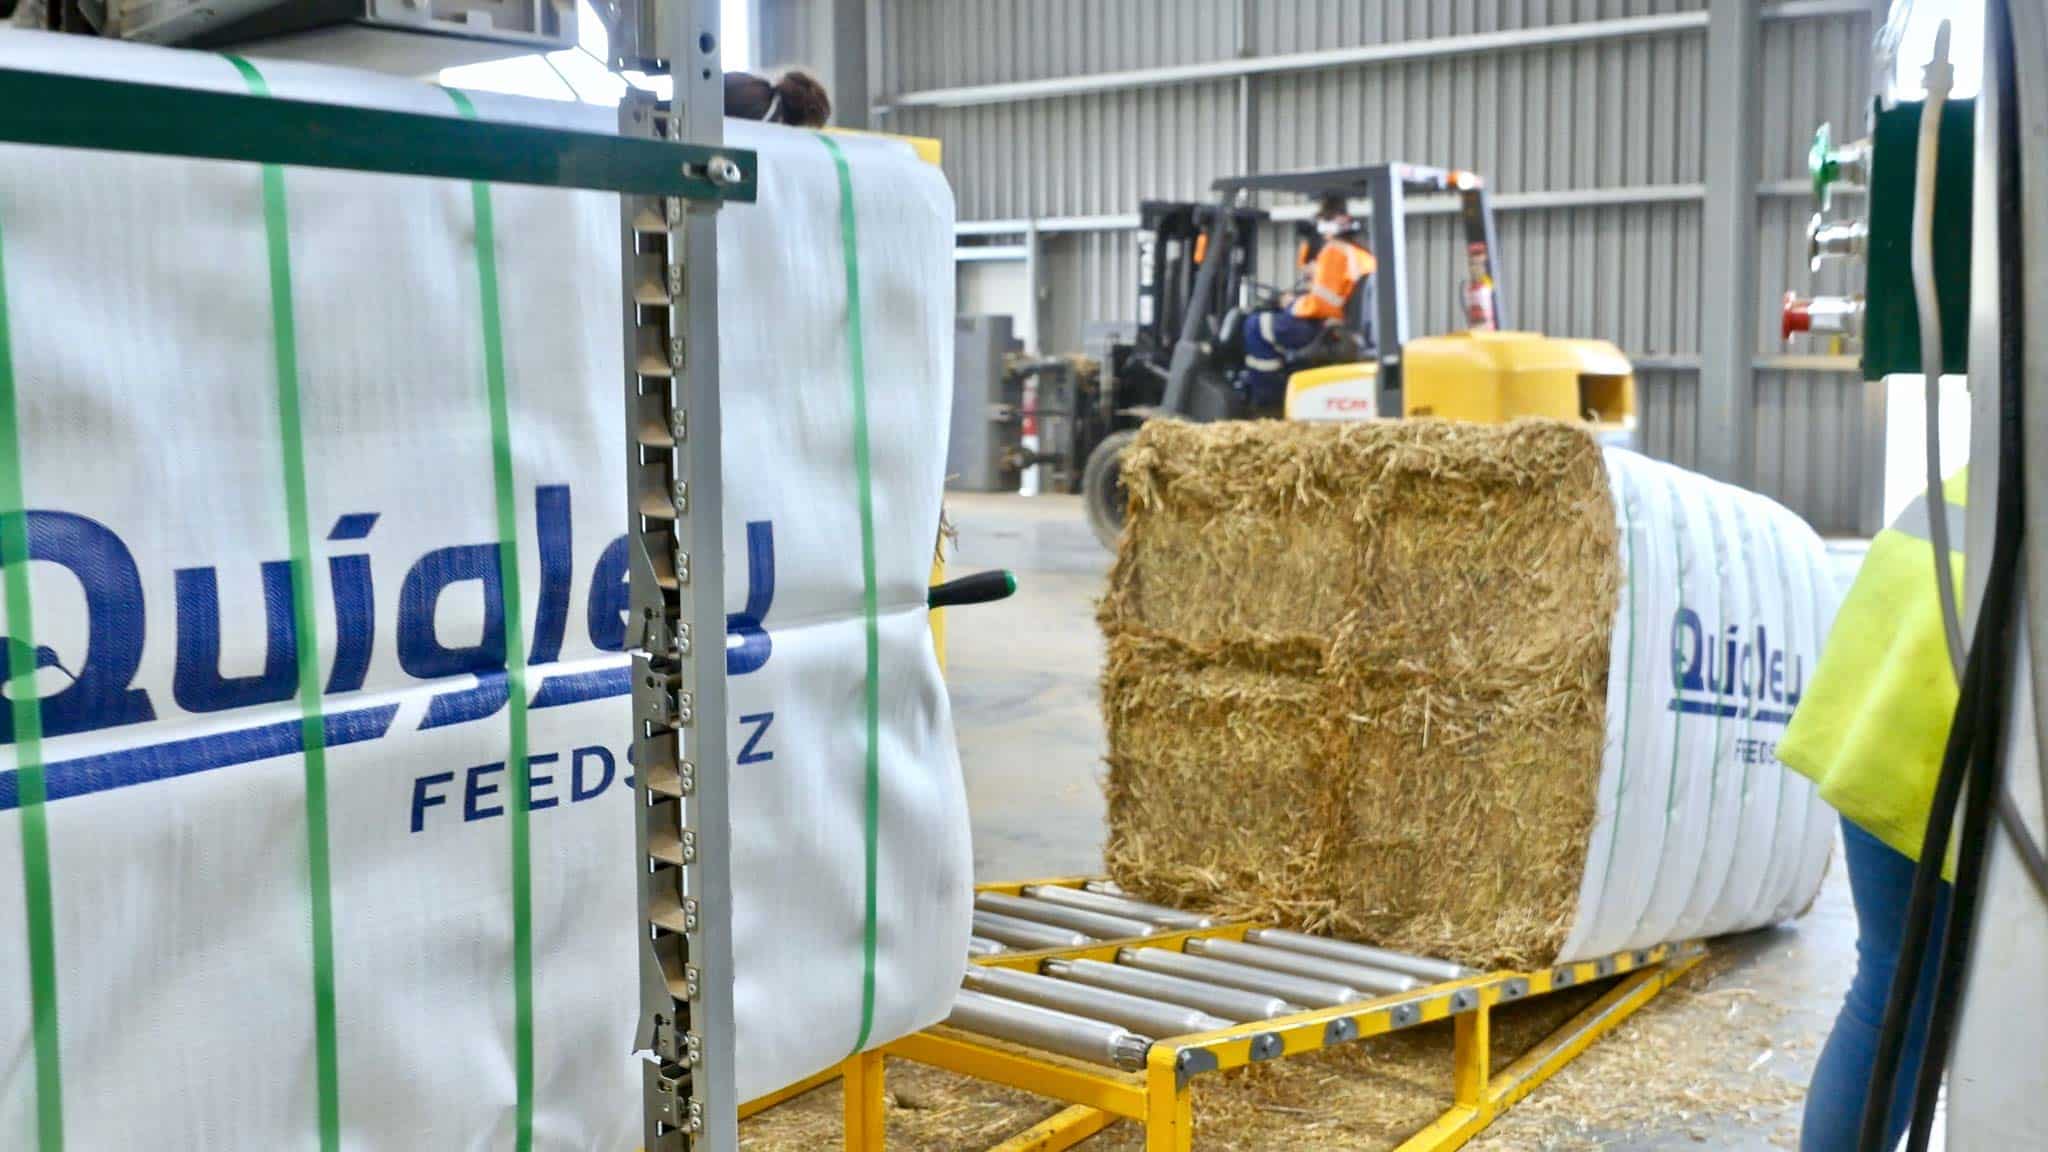 Hay bales on a conveyor belt in a warehouse.